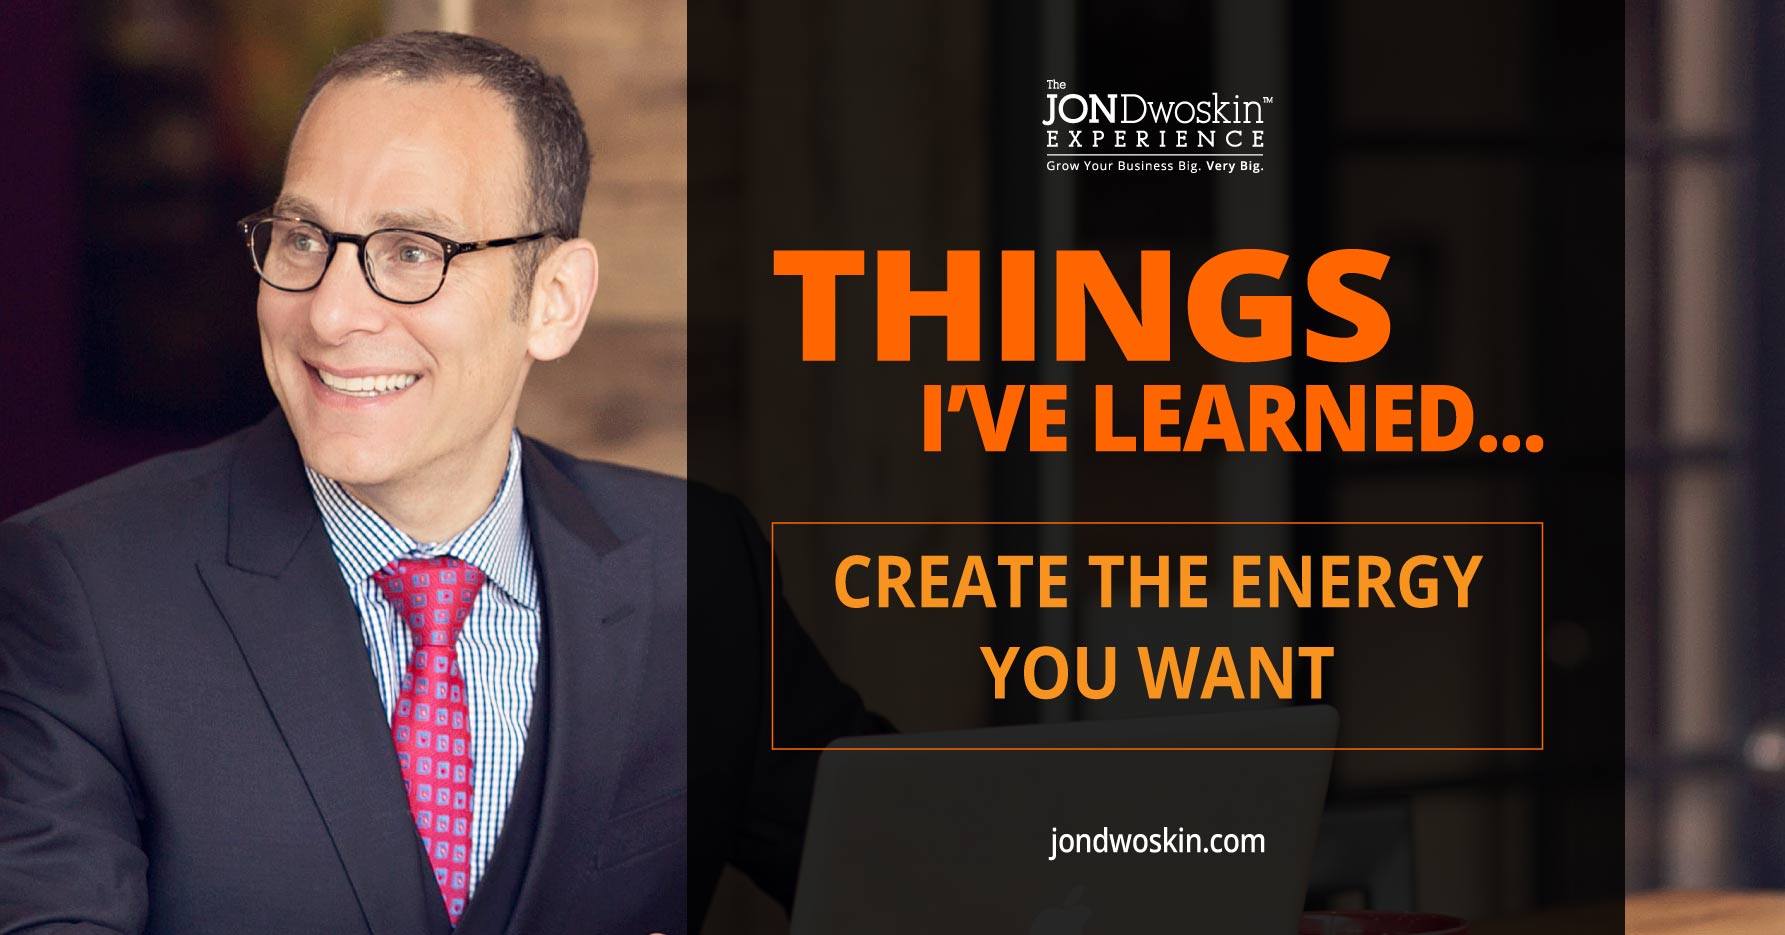 5 Thing’s I’ve Learned in My 50 Years: Create the Energy You Want